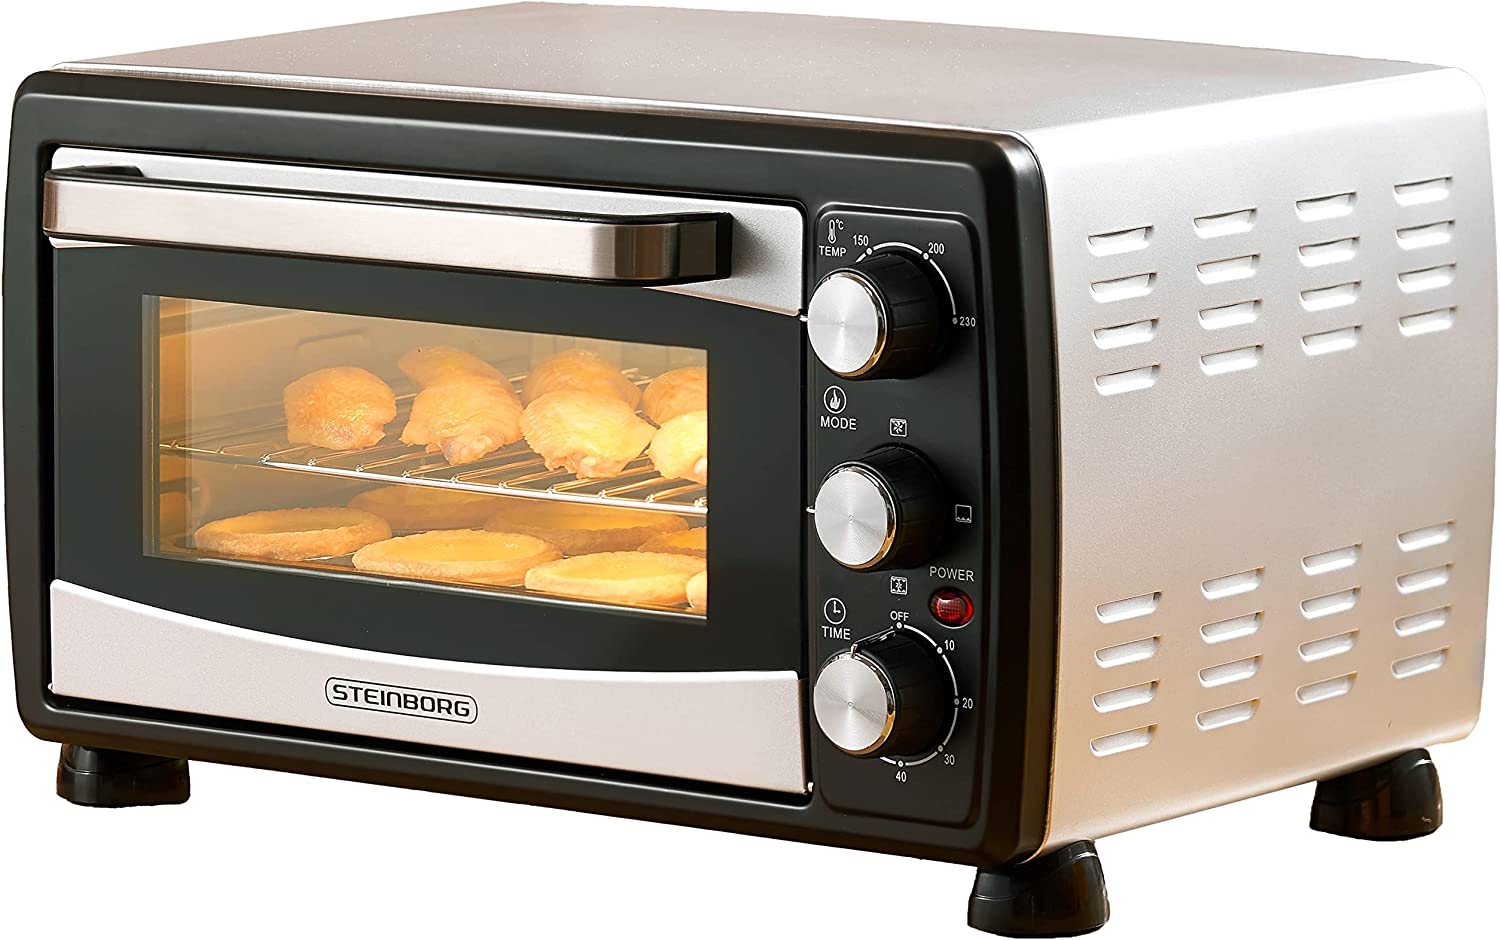 Steinborg 3-in-1 Mini Convection Oven / Pizza Oven, 20 Litre Capacity with Removable Crumb Tray, Timer, 100 - 250 °C, 1380 Watt, Top/Bottom Heat, Stainless Steel Design